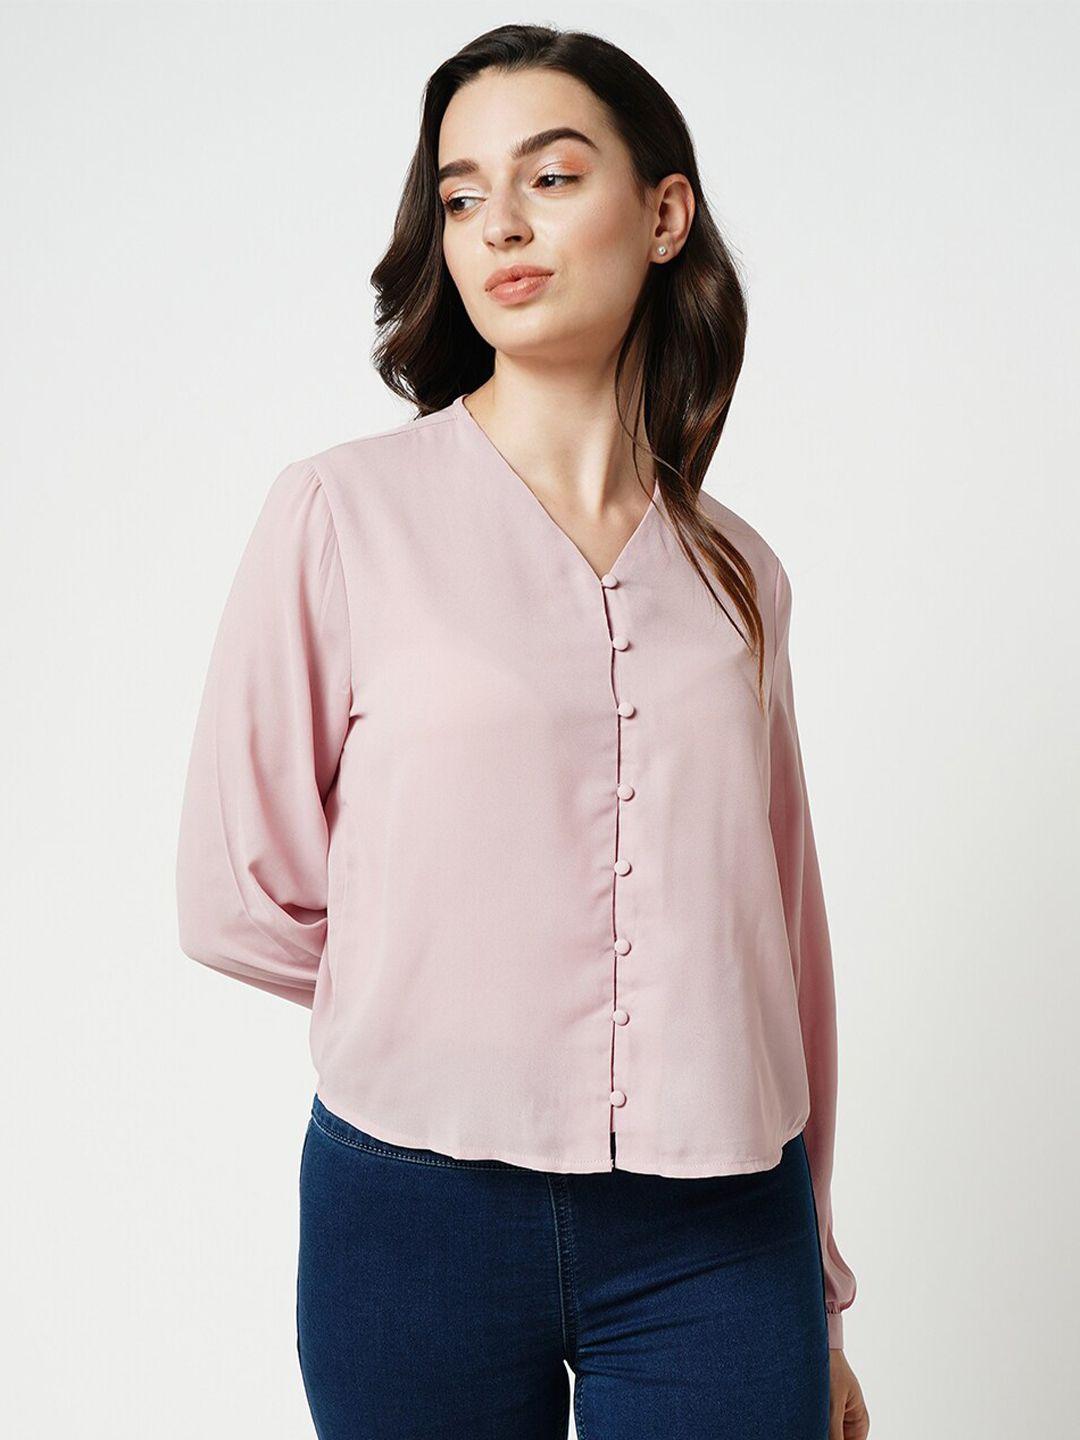 only v-neck cuffed sleeves shirt style top